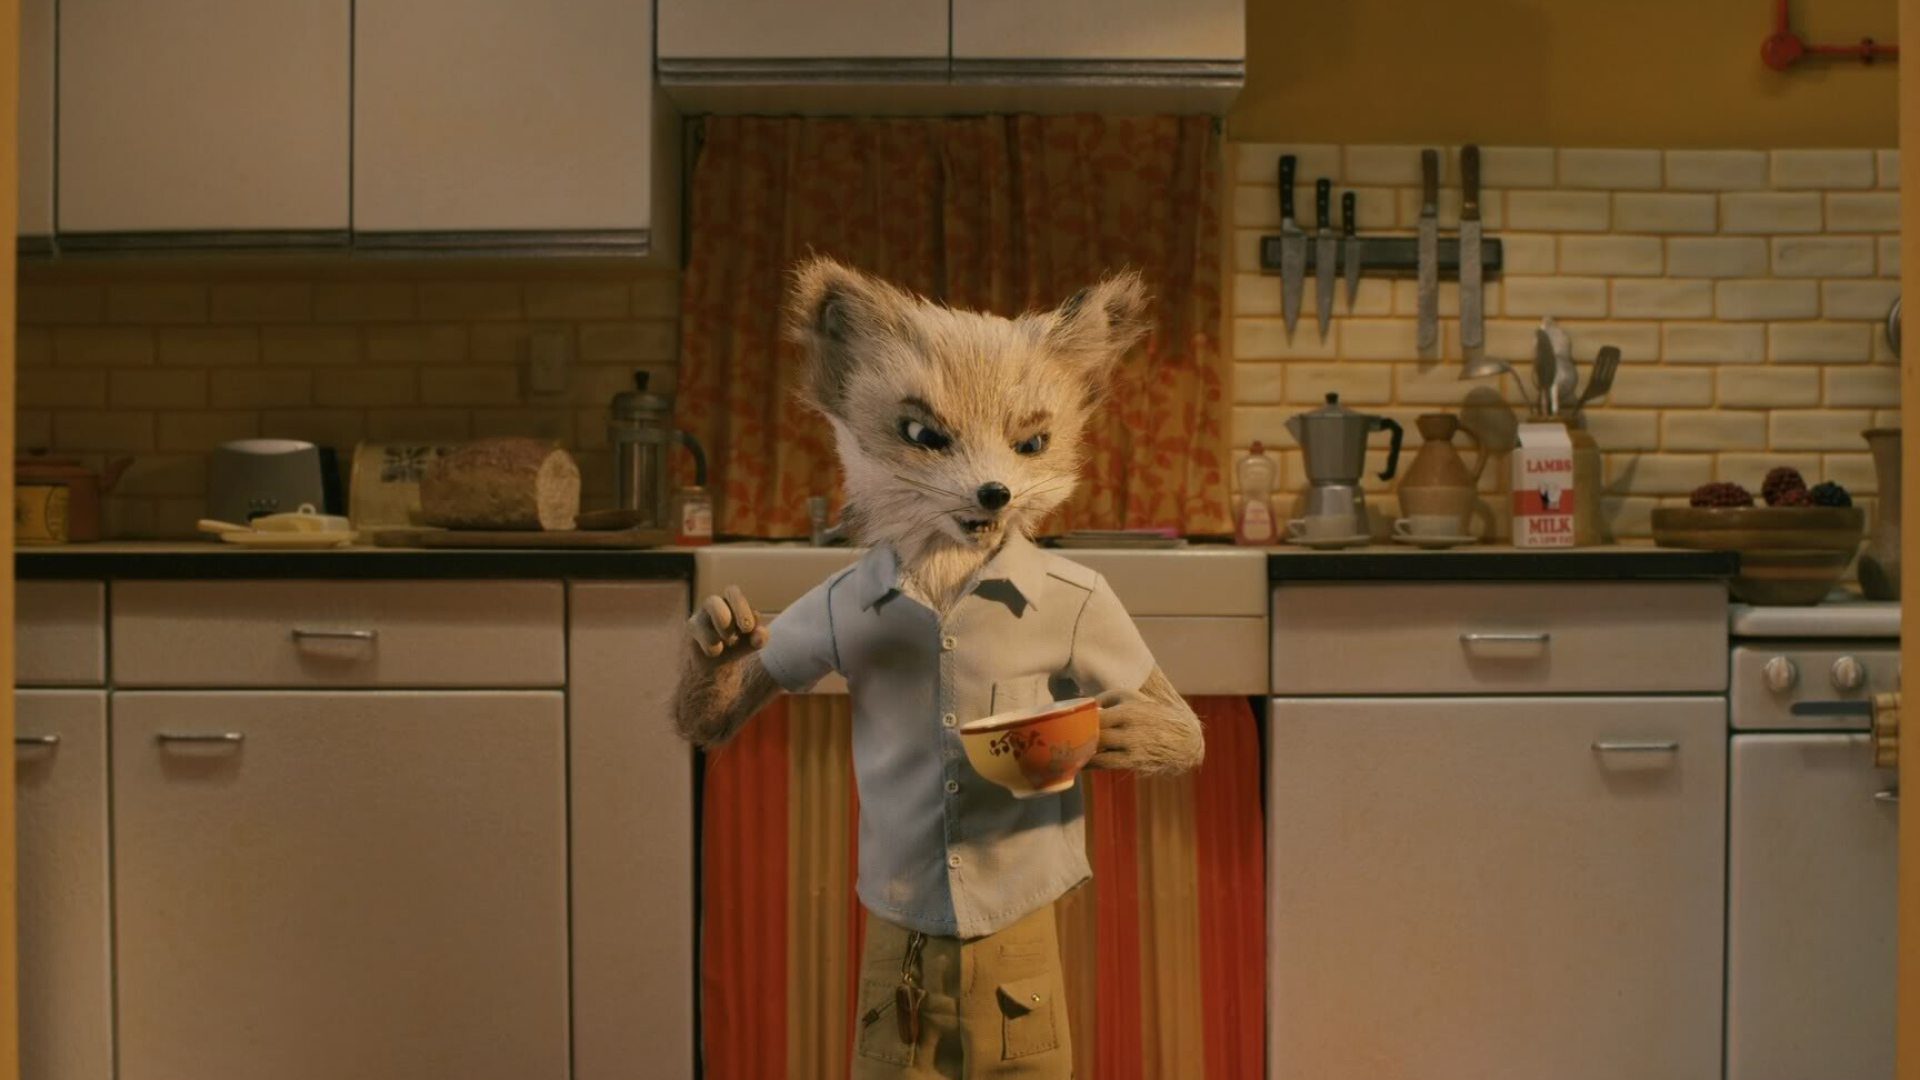 Fantastic Mr. Fox pictures wallpapers, Quirky and delightful, Mr. Fantastic wallpaper, Mr. Fox artwork, 1920x1080 Full HD Desktop